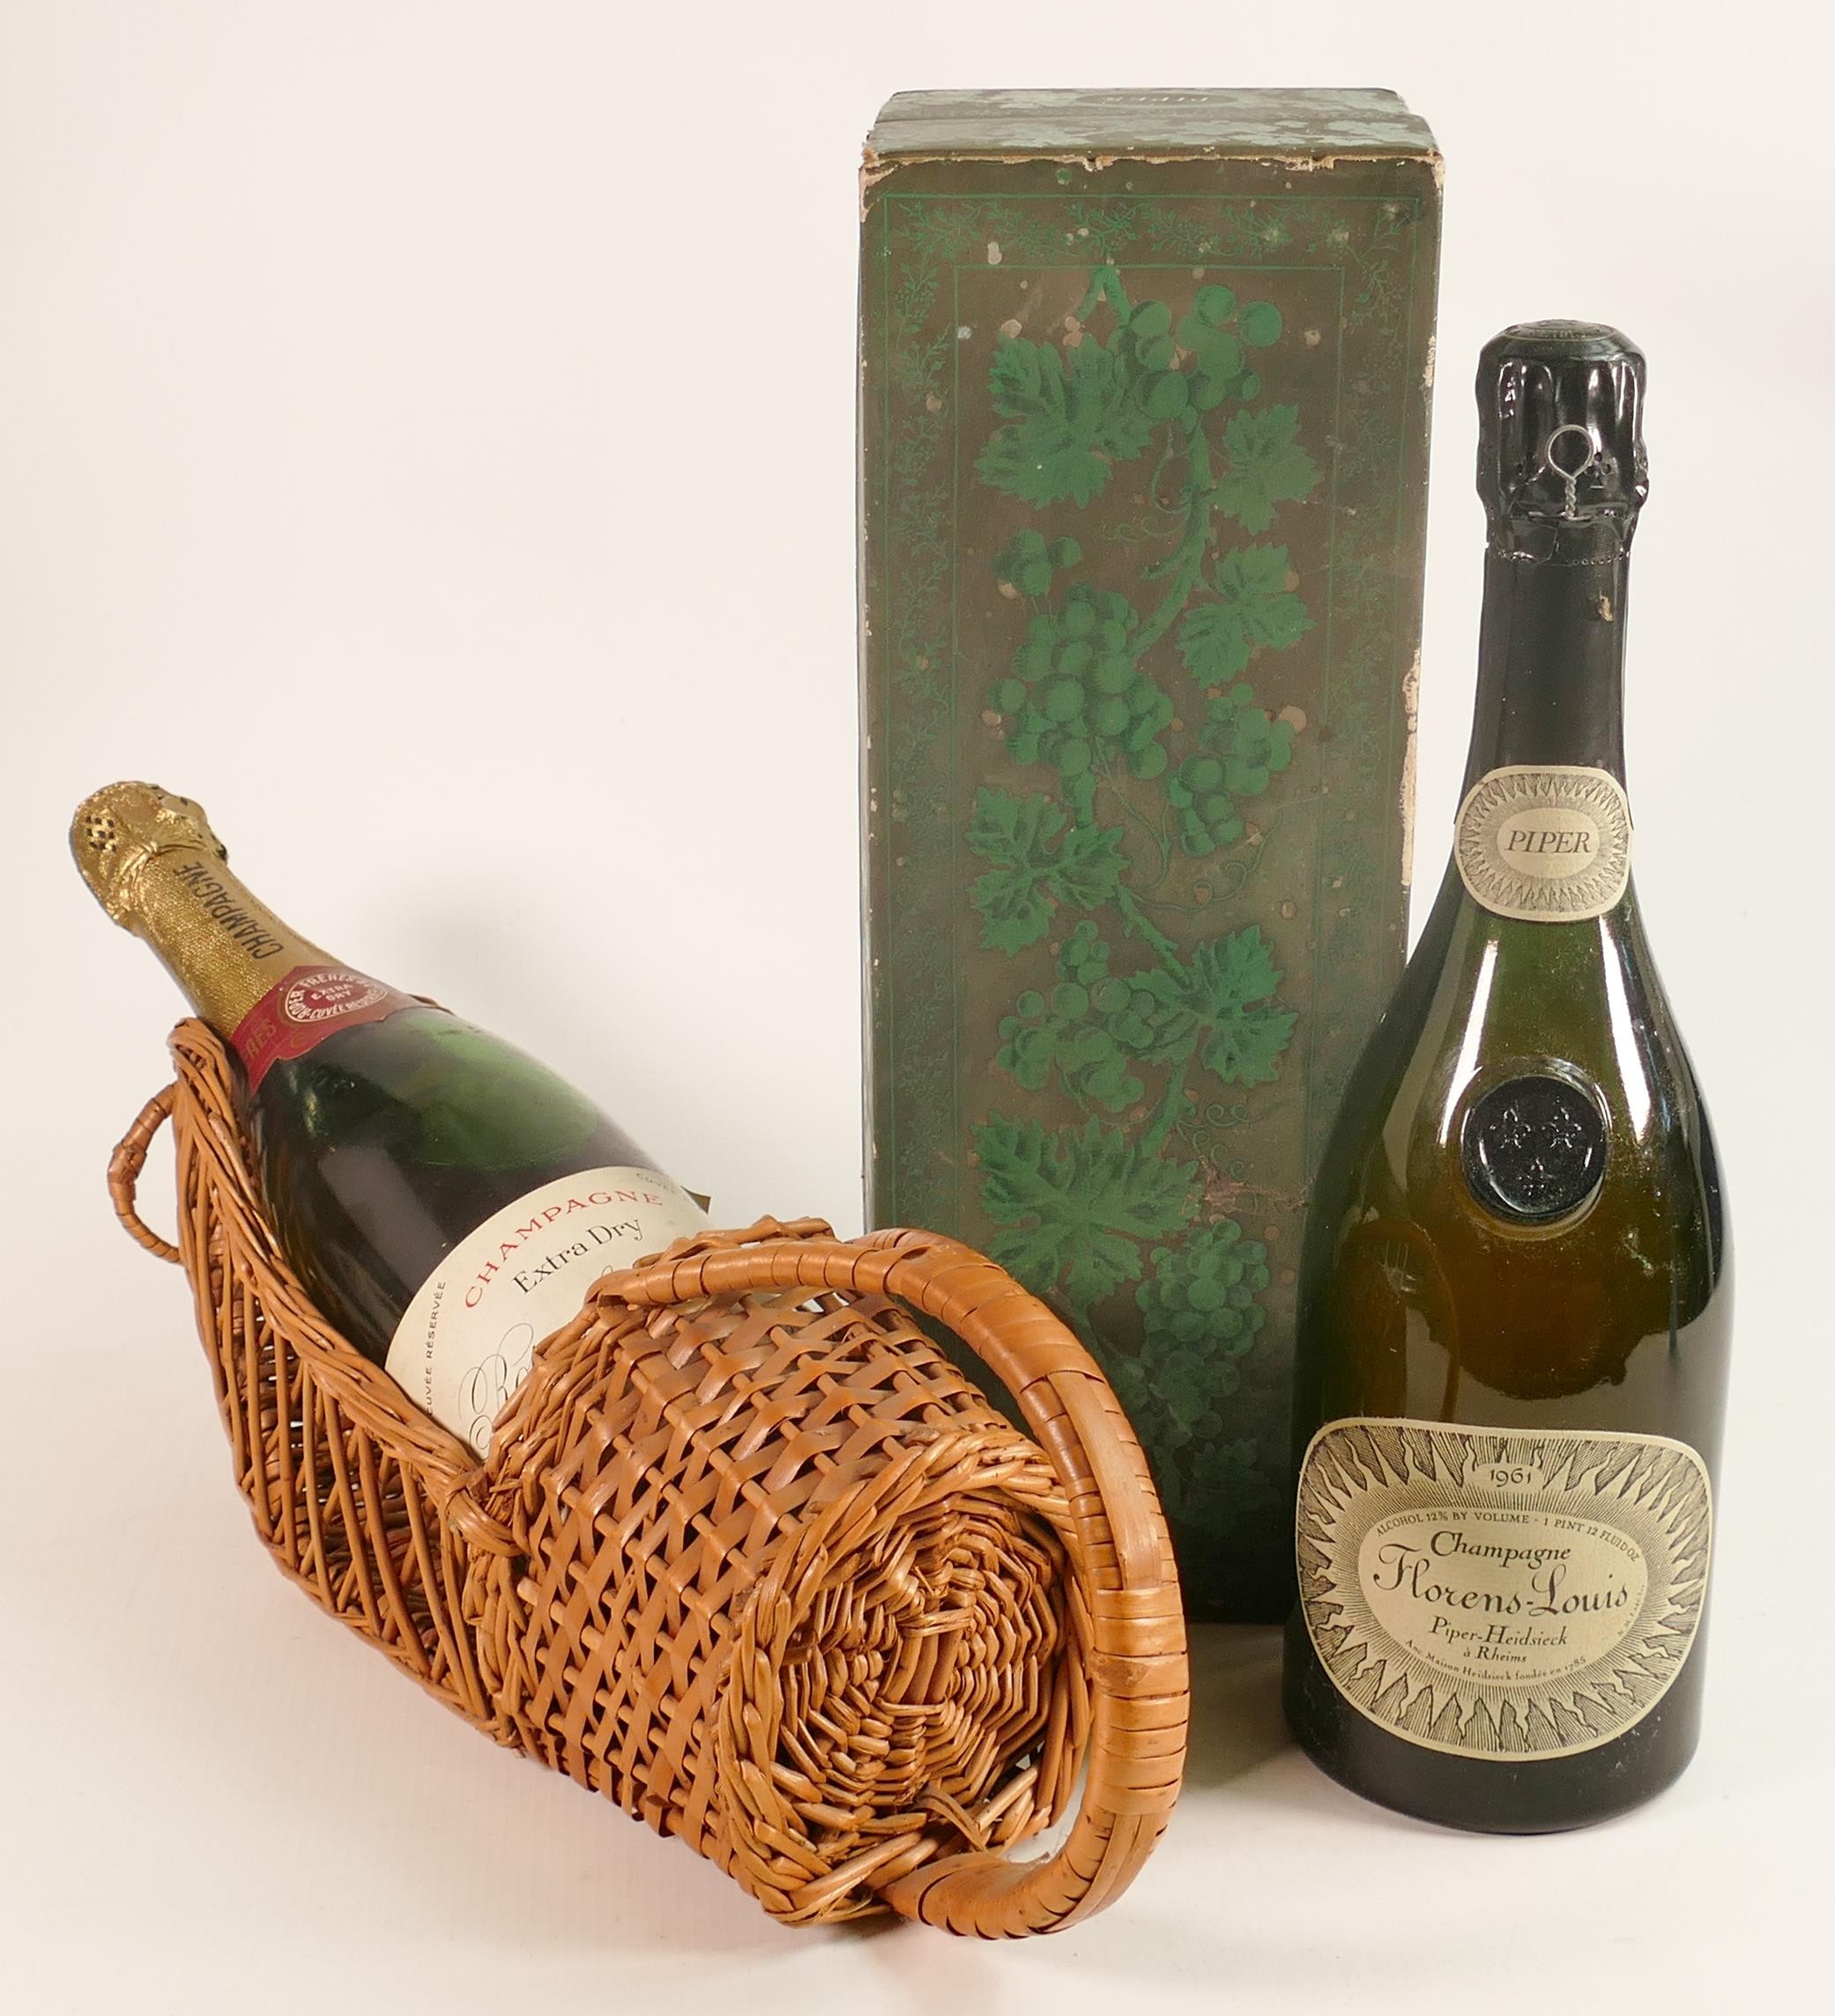 Boxed 1961 Piper Heidsieck Cuvee Florens Louis Champagne & similar Roper Freres extra dry Champagne.